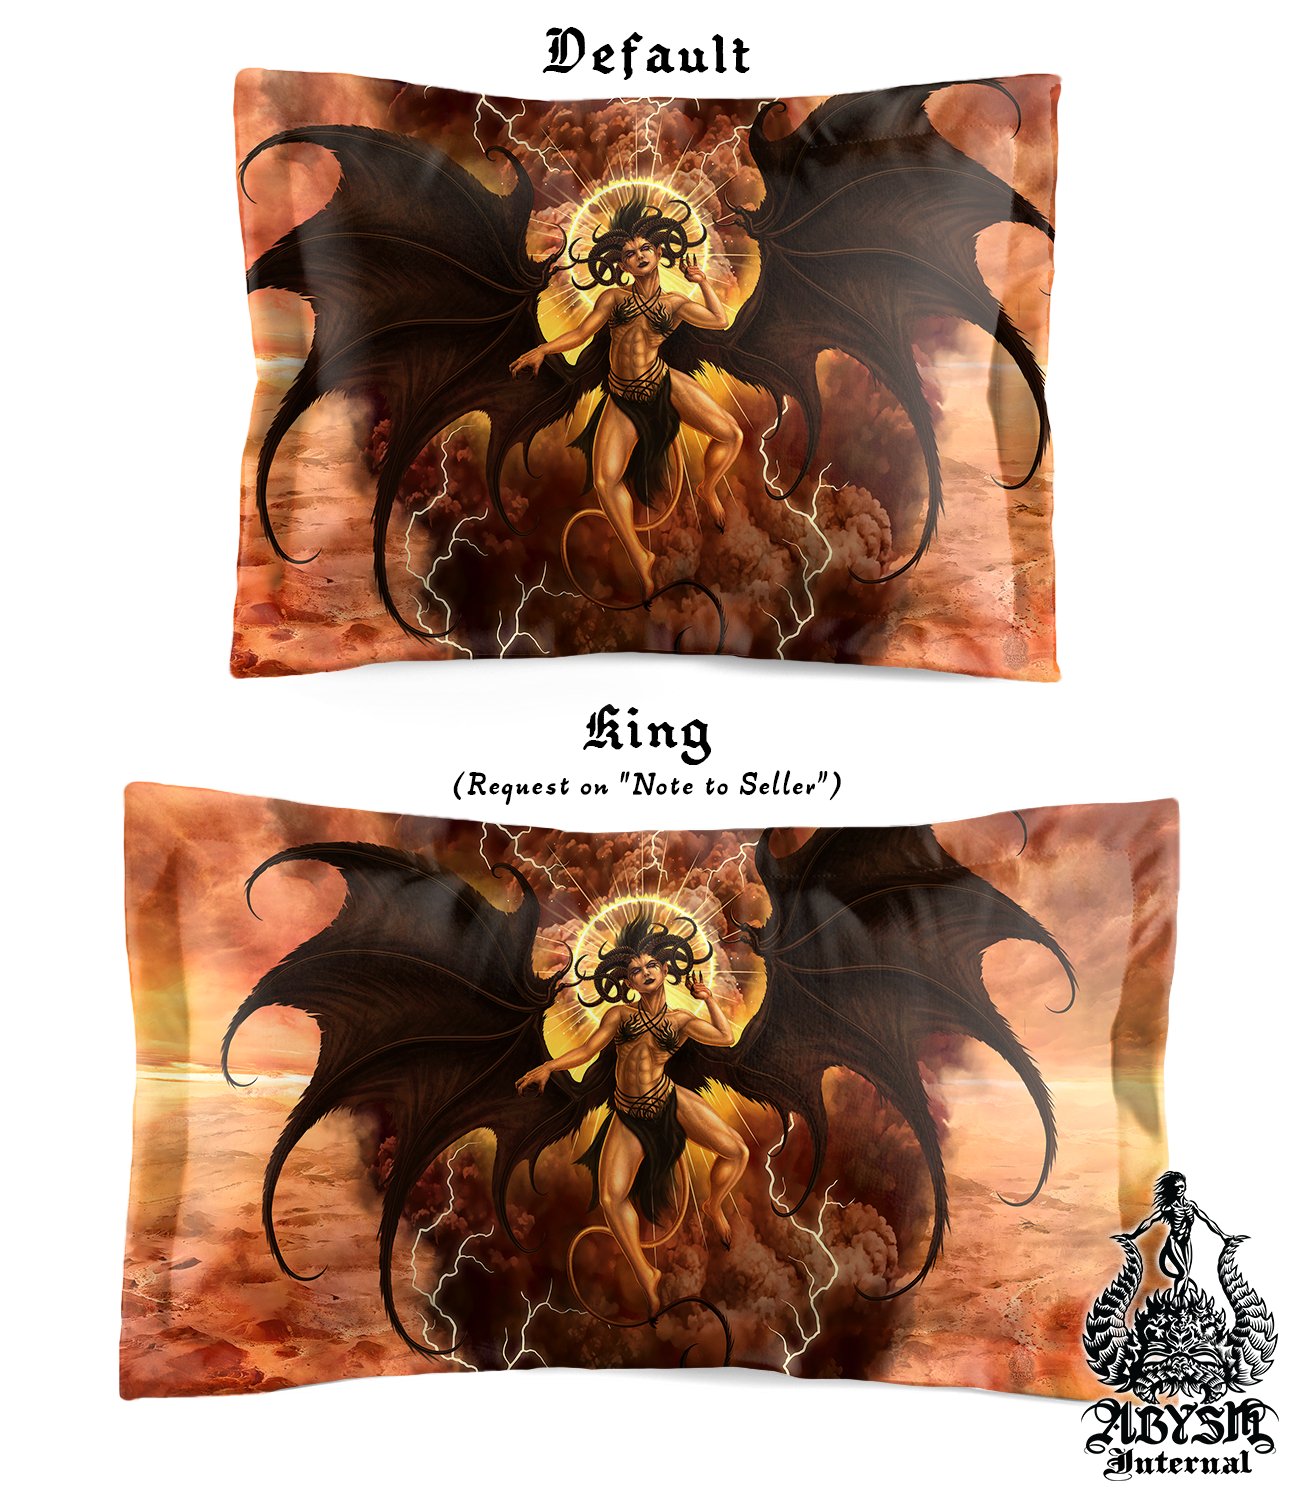 Lilith Bedding Set, Comforter or Duvet, Erotic Art, Satanic Room, Nude Demoness, Dark Bed Cover and Bedroom Decor, King, Queen & Twin Size - Clothed, Naked or Semi-Nude, 3 Versions - Abysm Internal